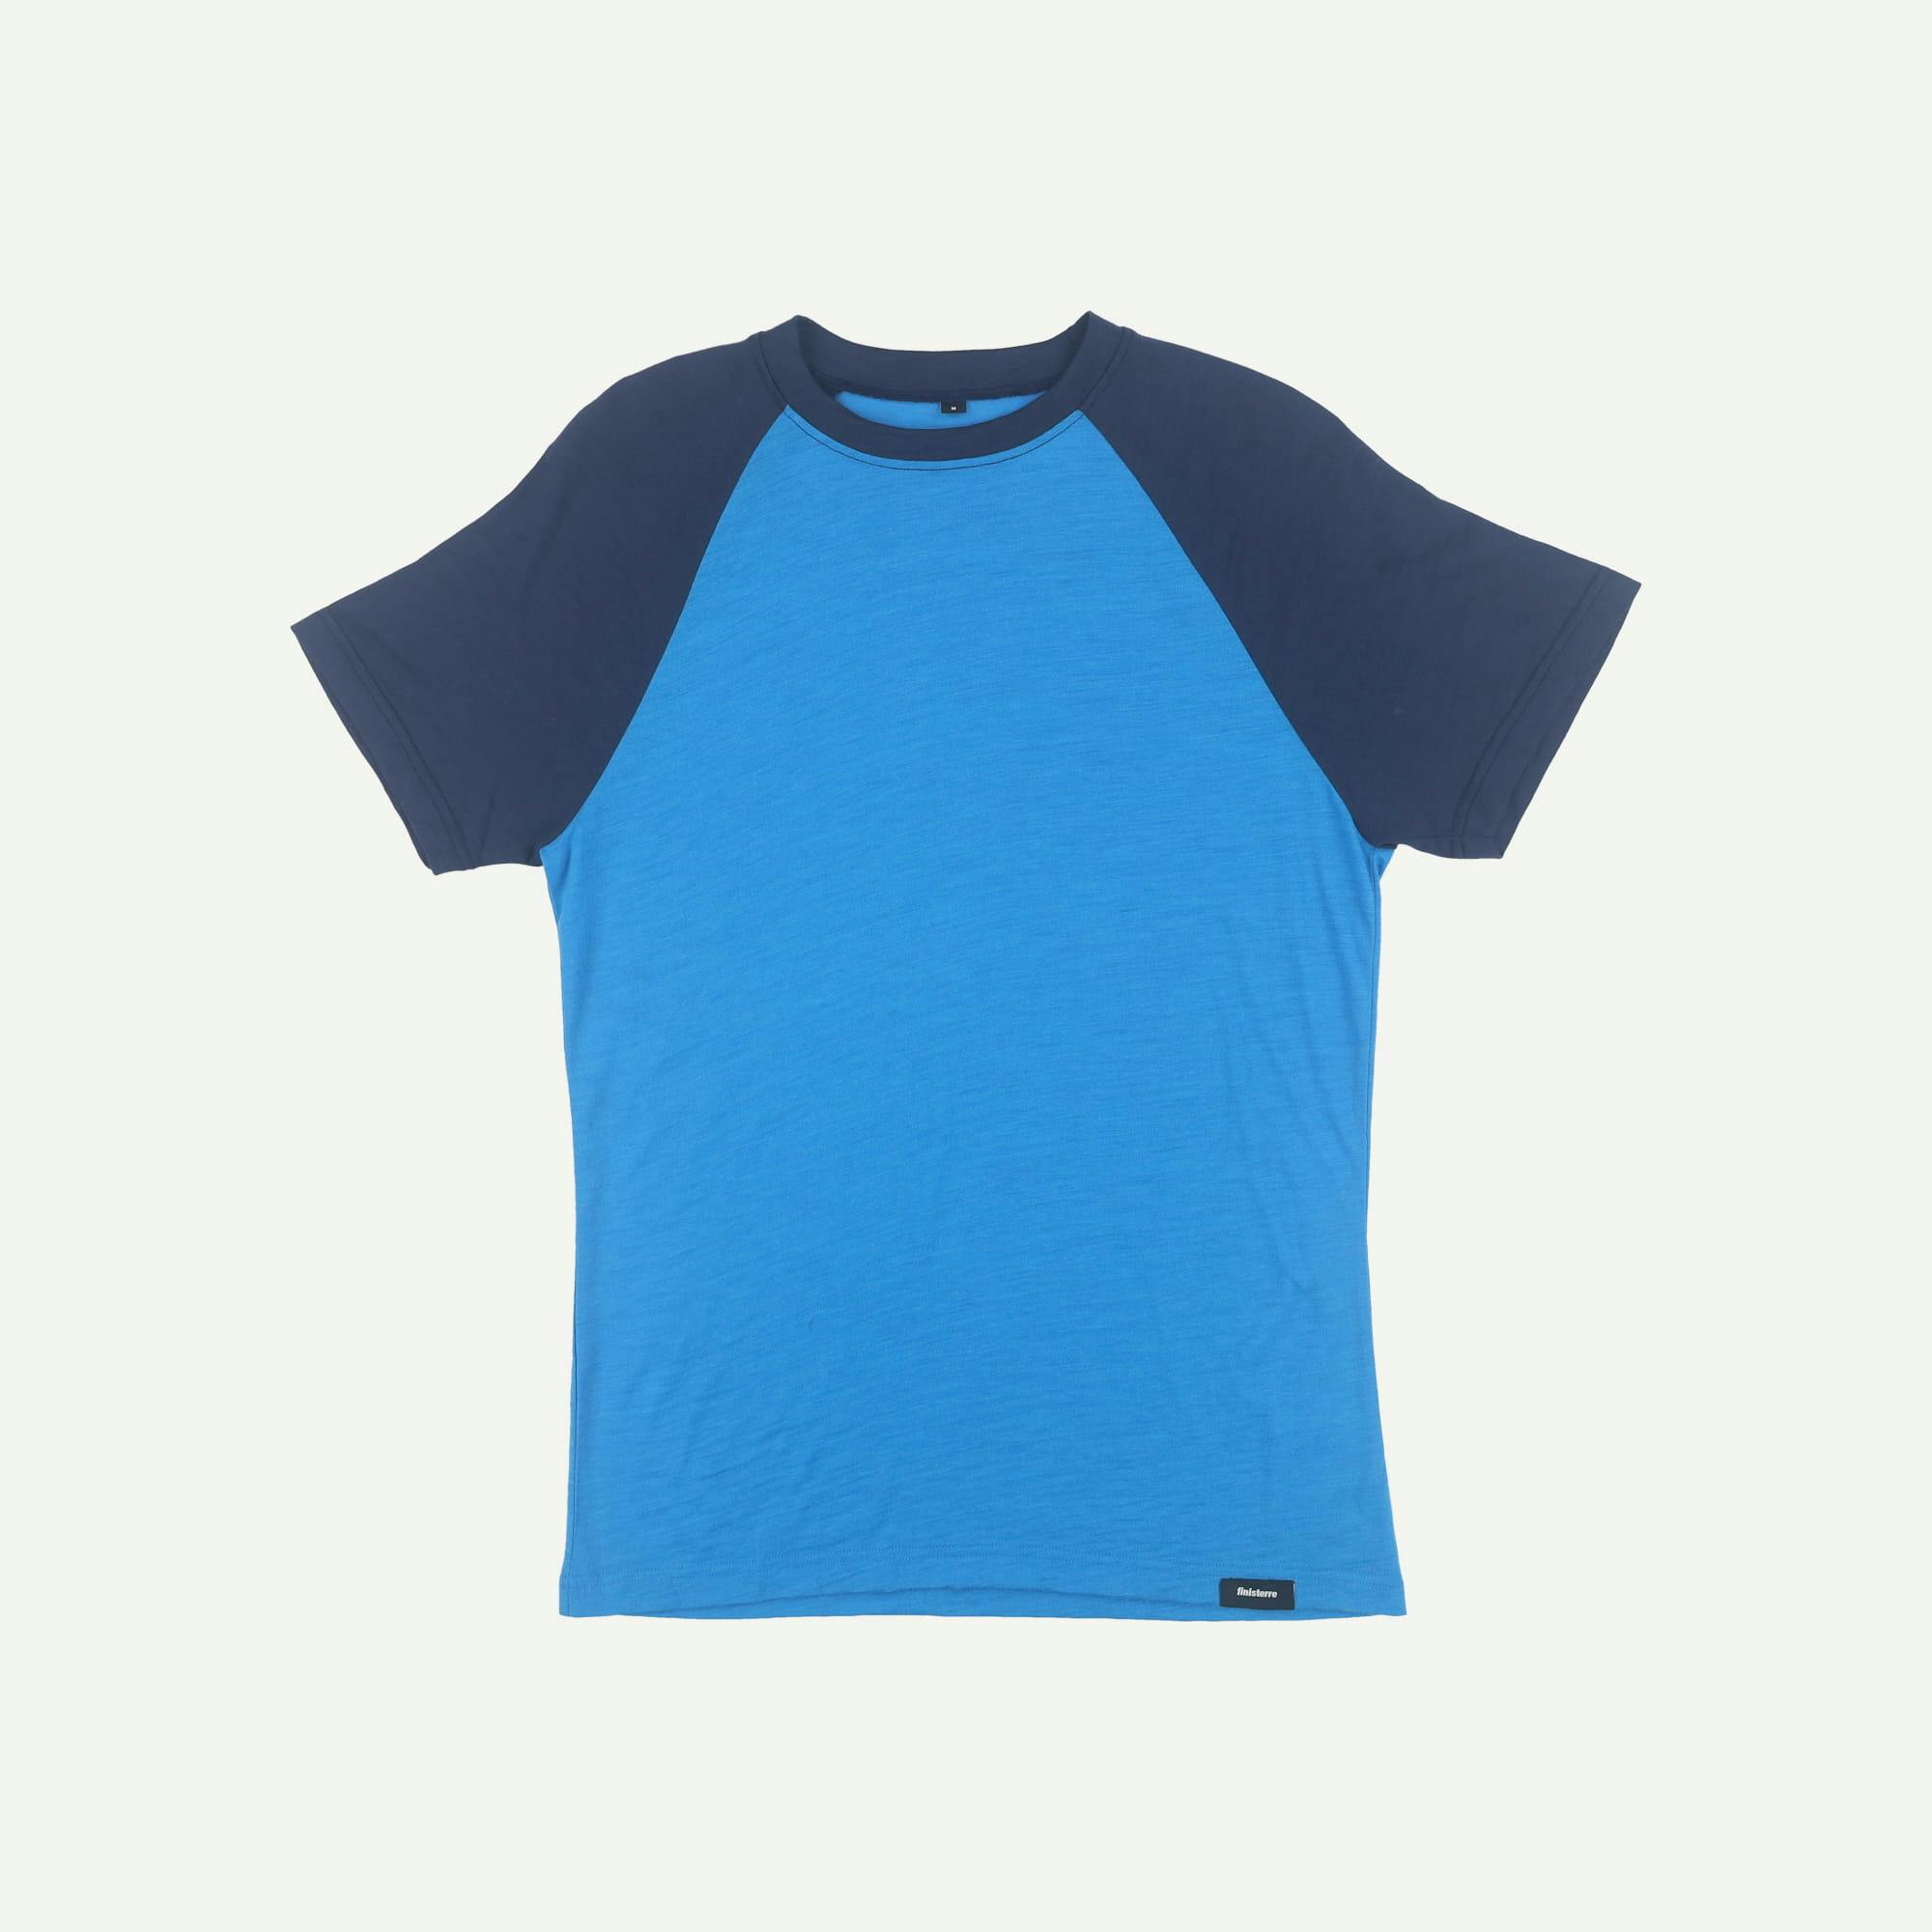 Finisterre As new Blue Base Layer T-shirt